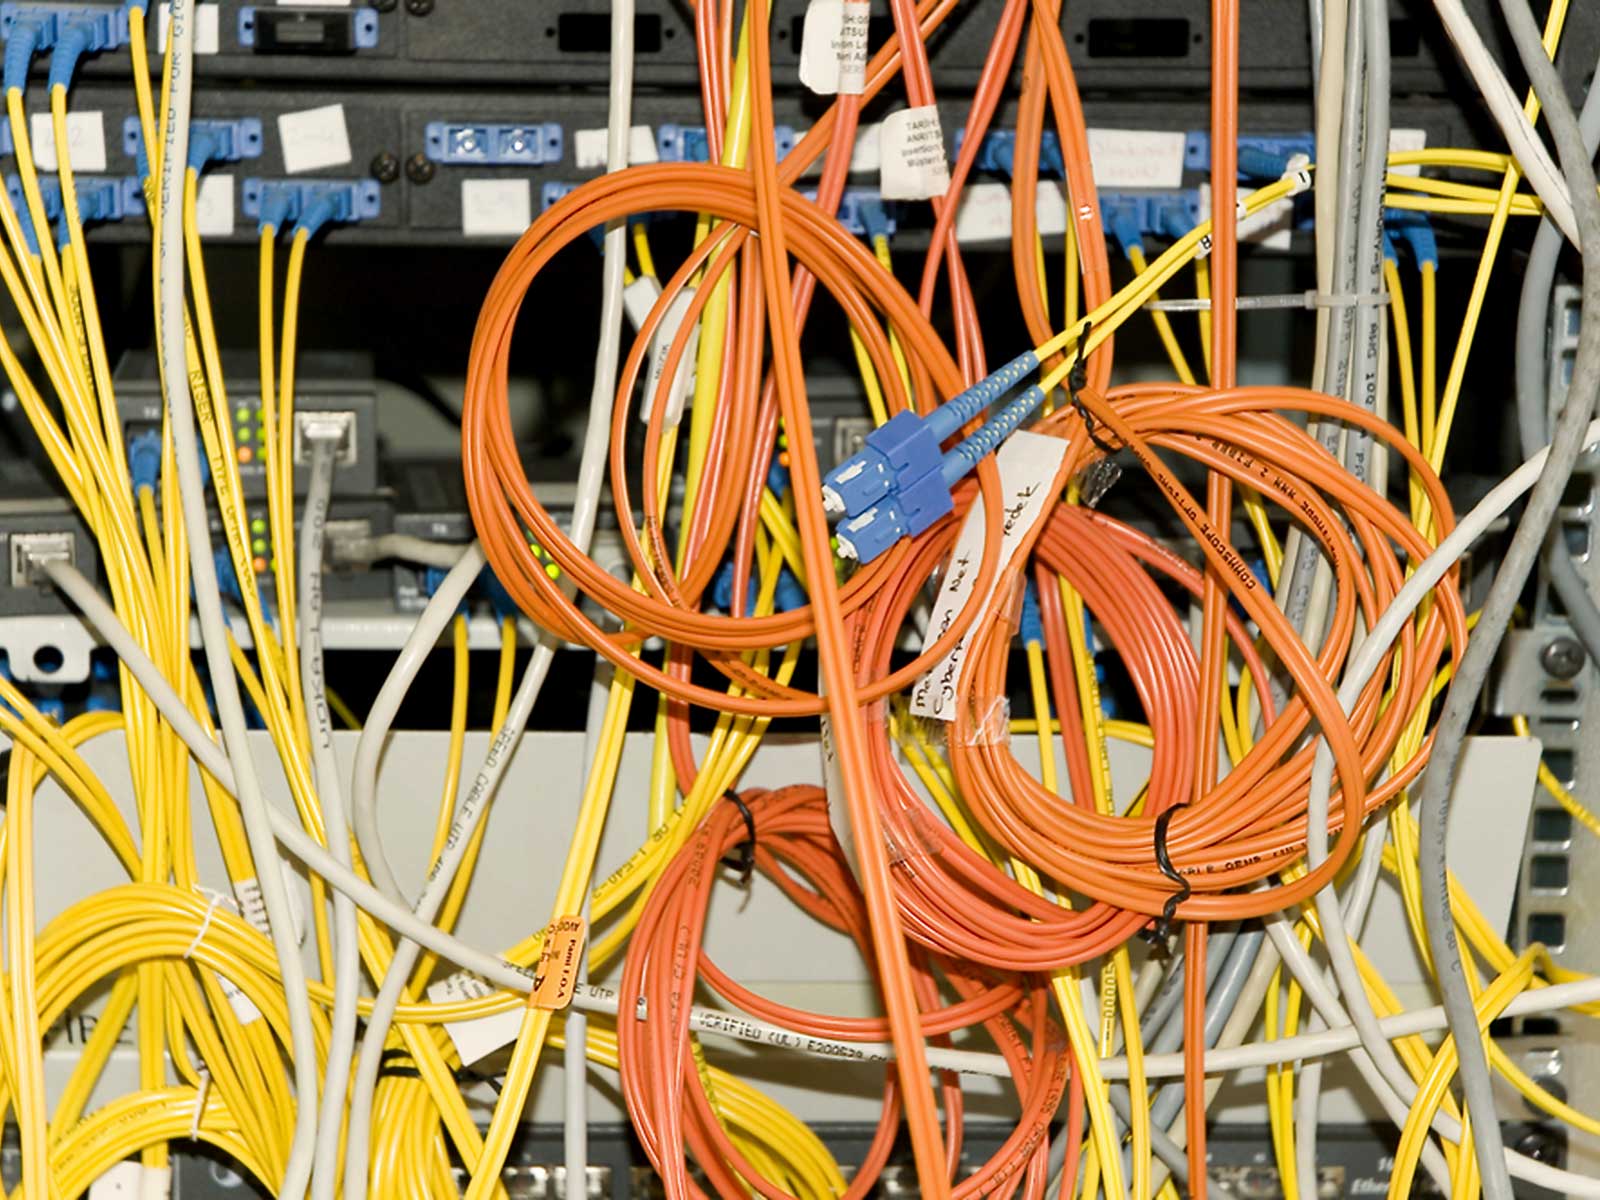 Negotiating the Spaghetti Maze: How to Deal With Wiring Mess